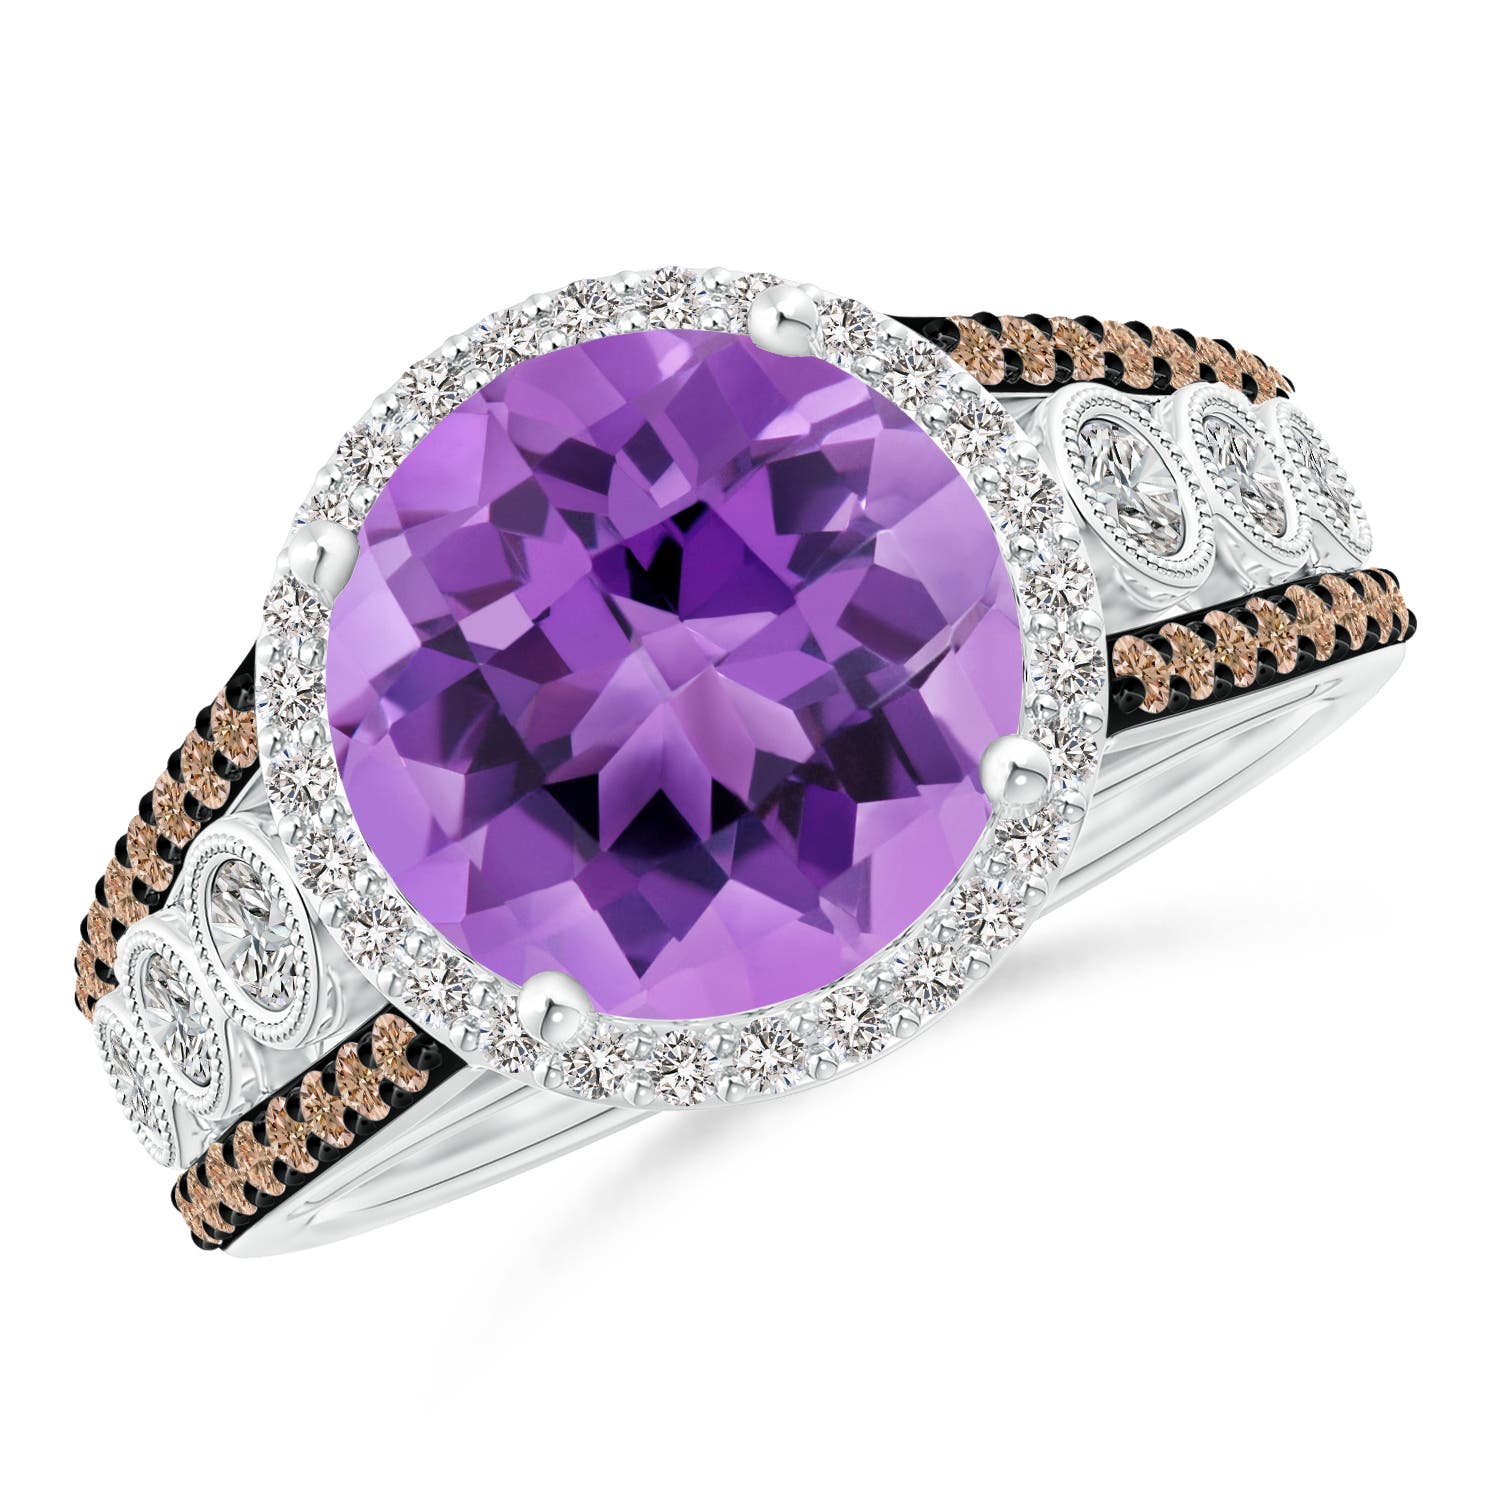 AA - Amethyst / 4.42 CT / 14 KT White Gold